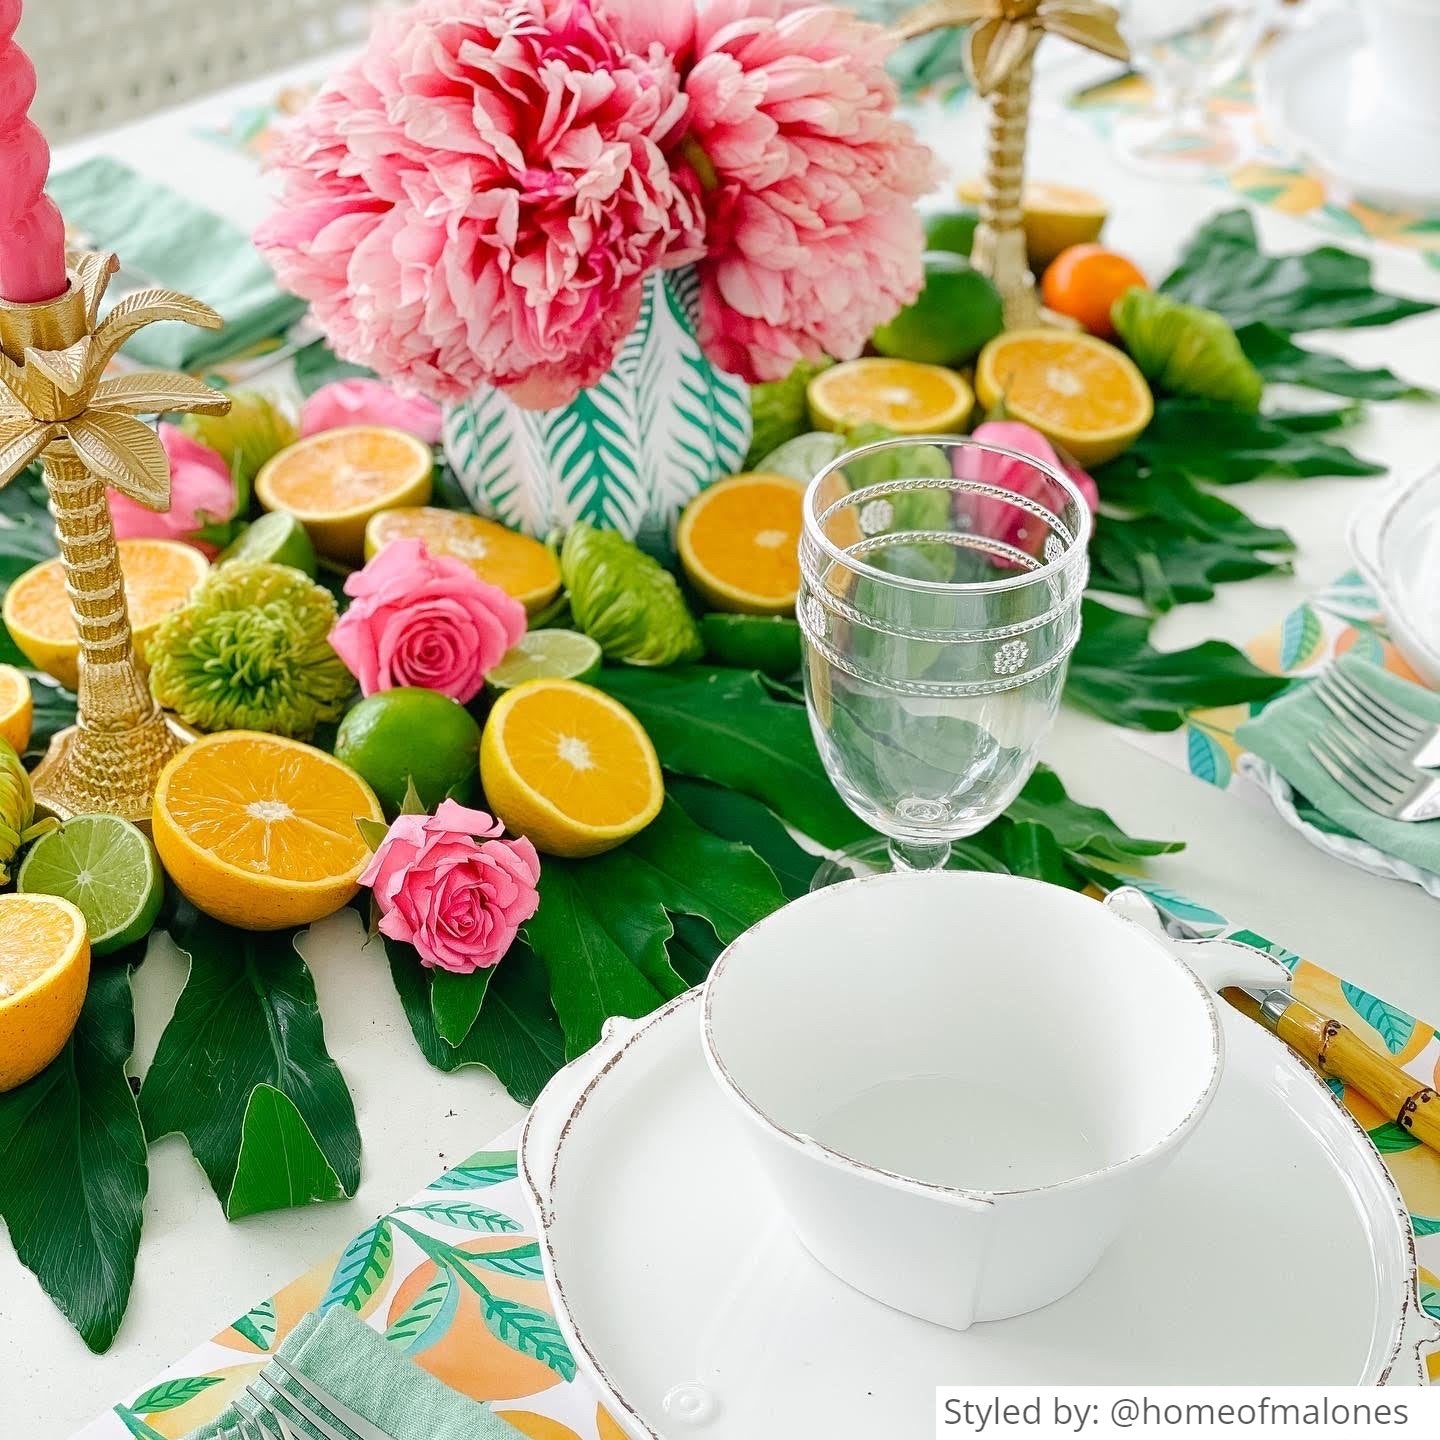 Summer table setting with an orange patterned paper placemat layered with white plates and teacup